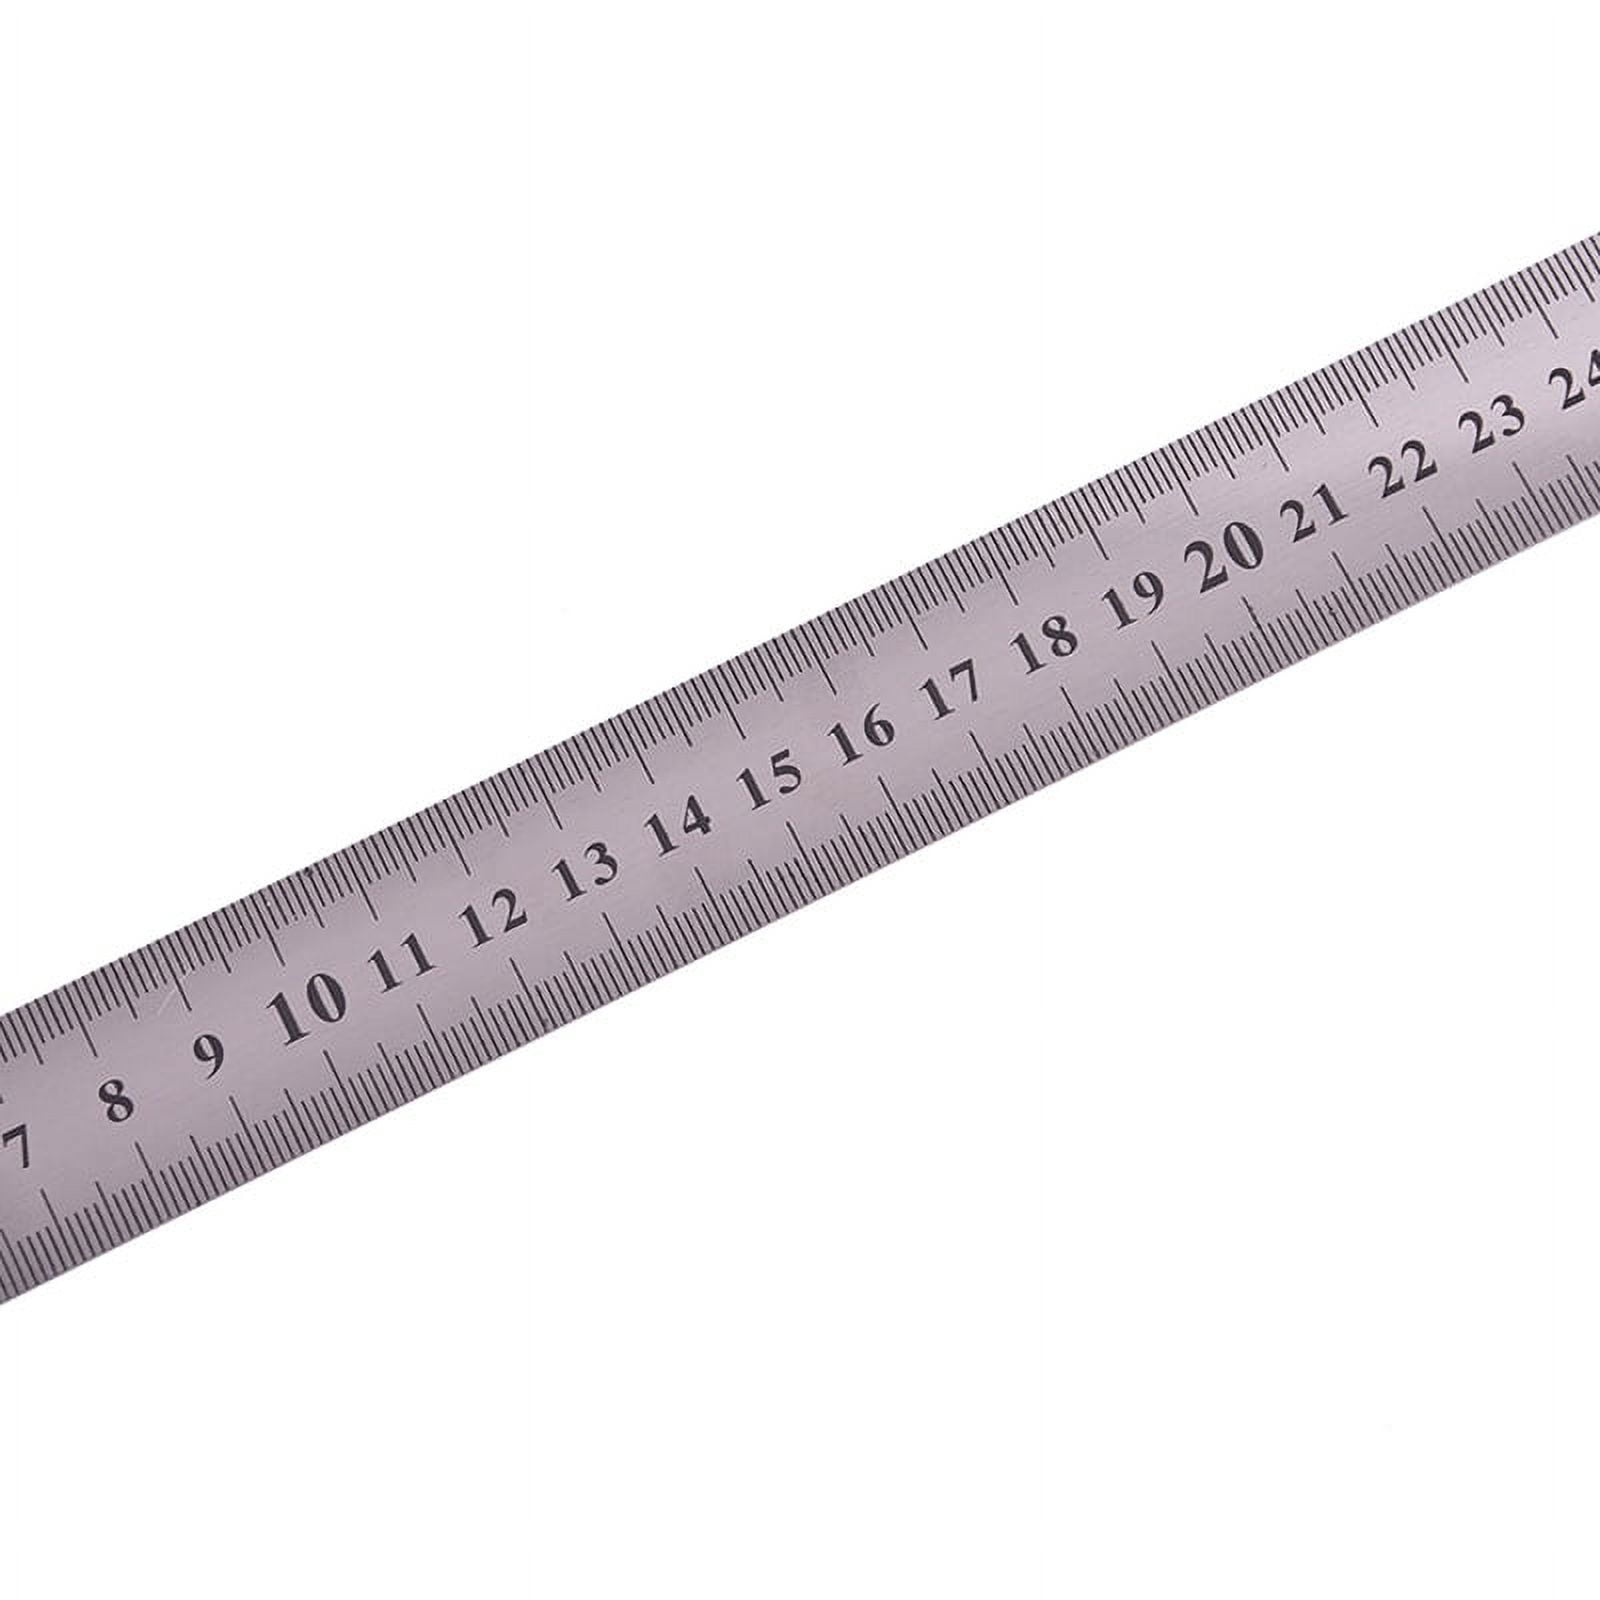 Metal Ruler Stainless Steel Straight Edge 12 Drawing Cutting Non Skid Back  2pk